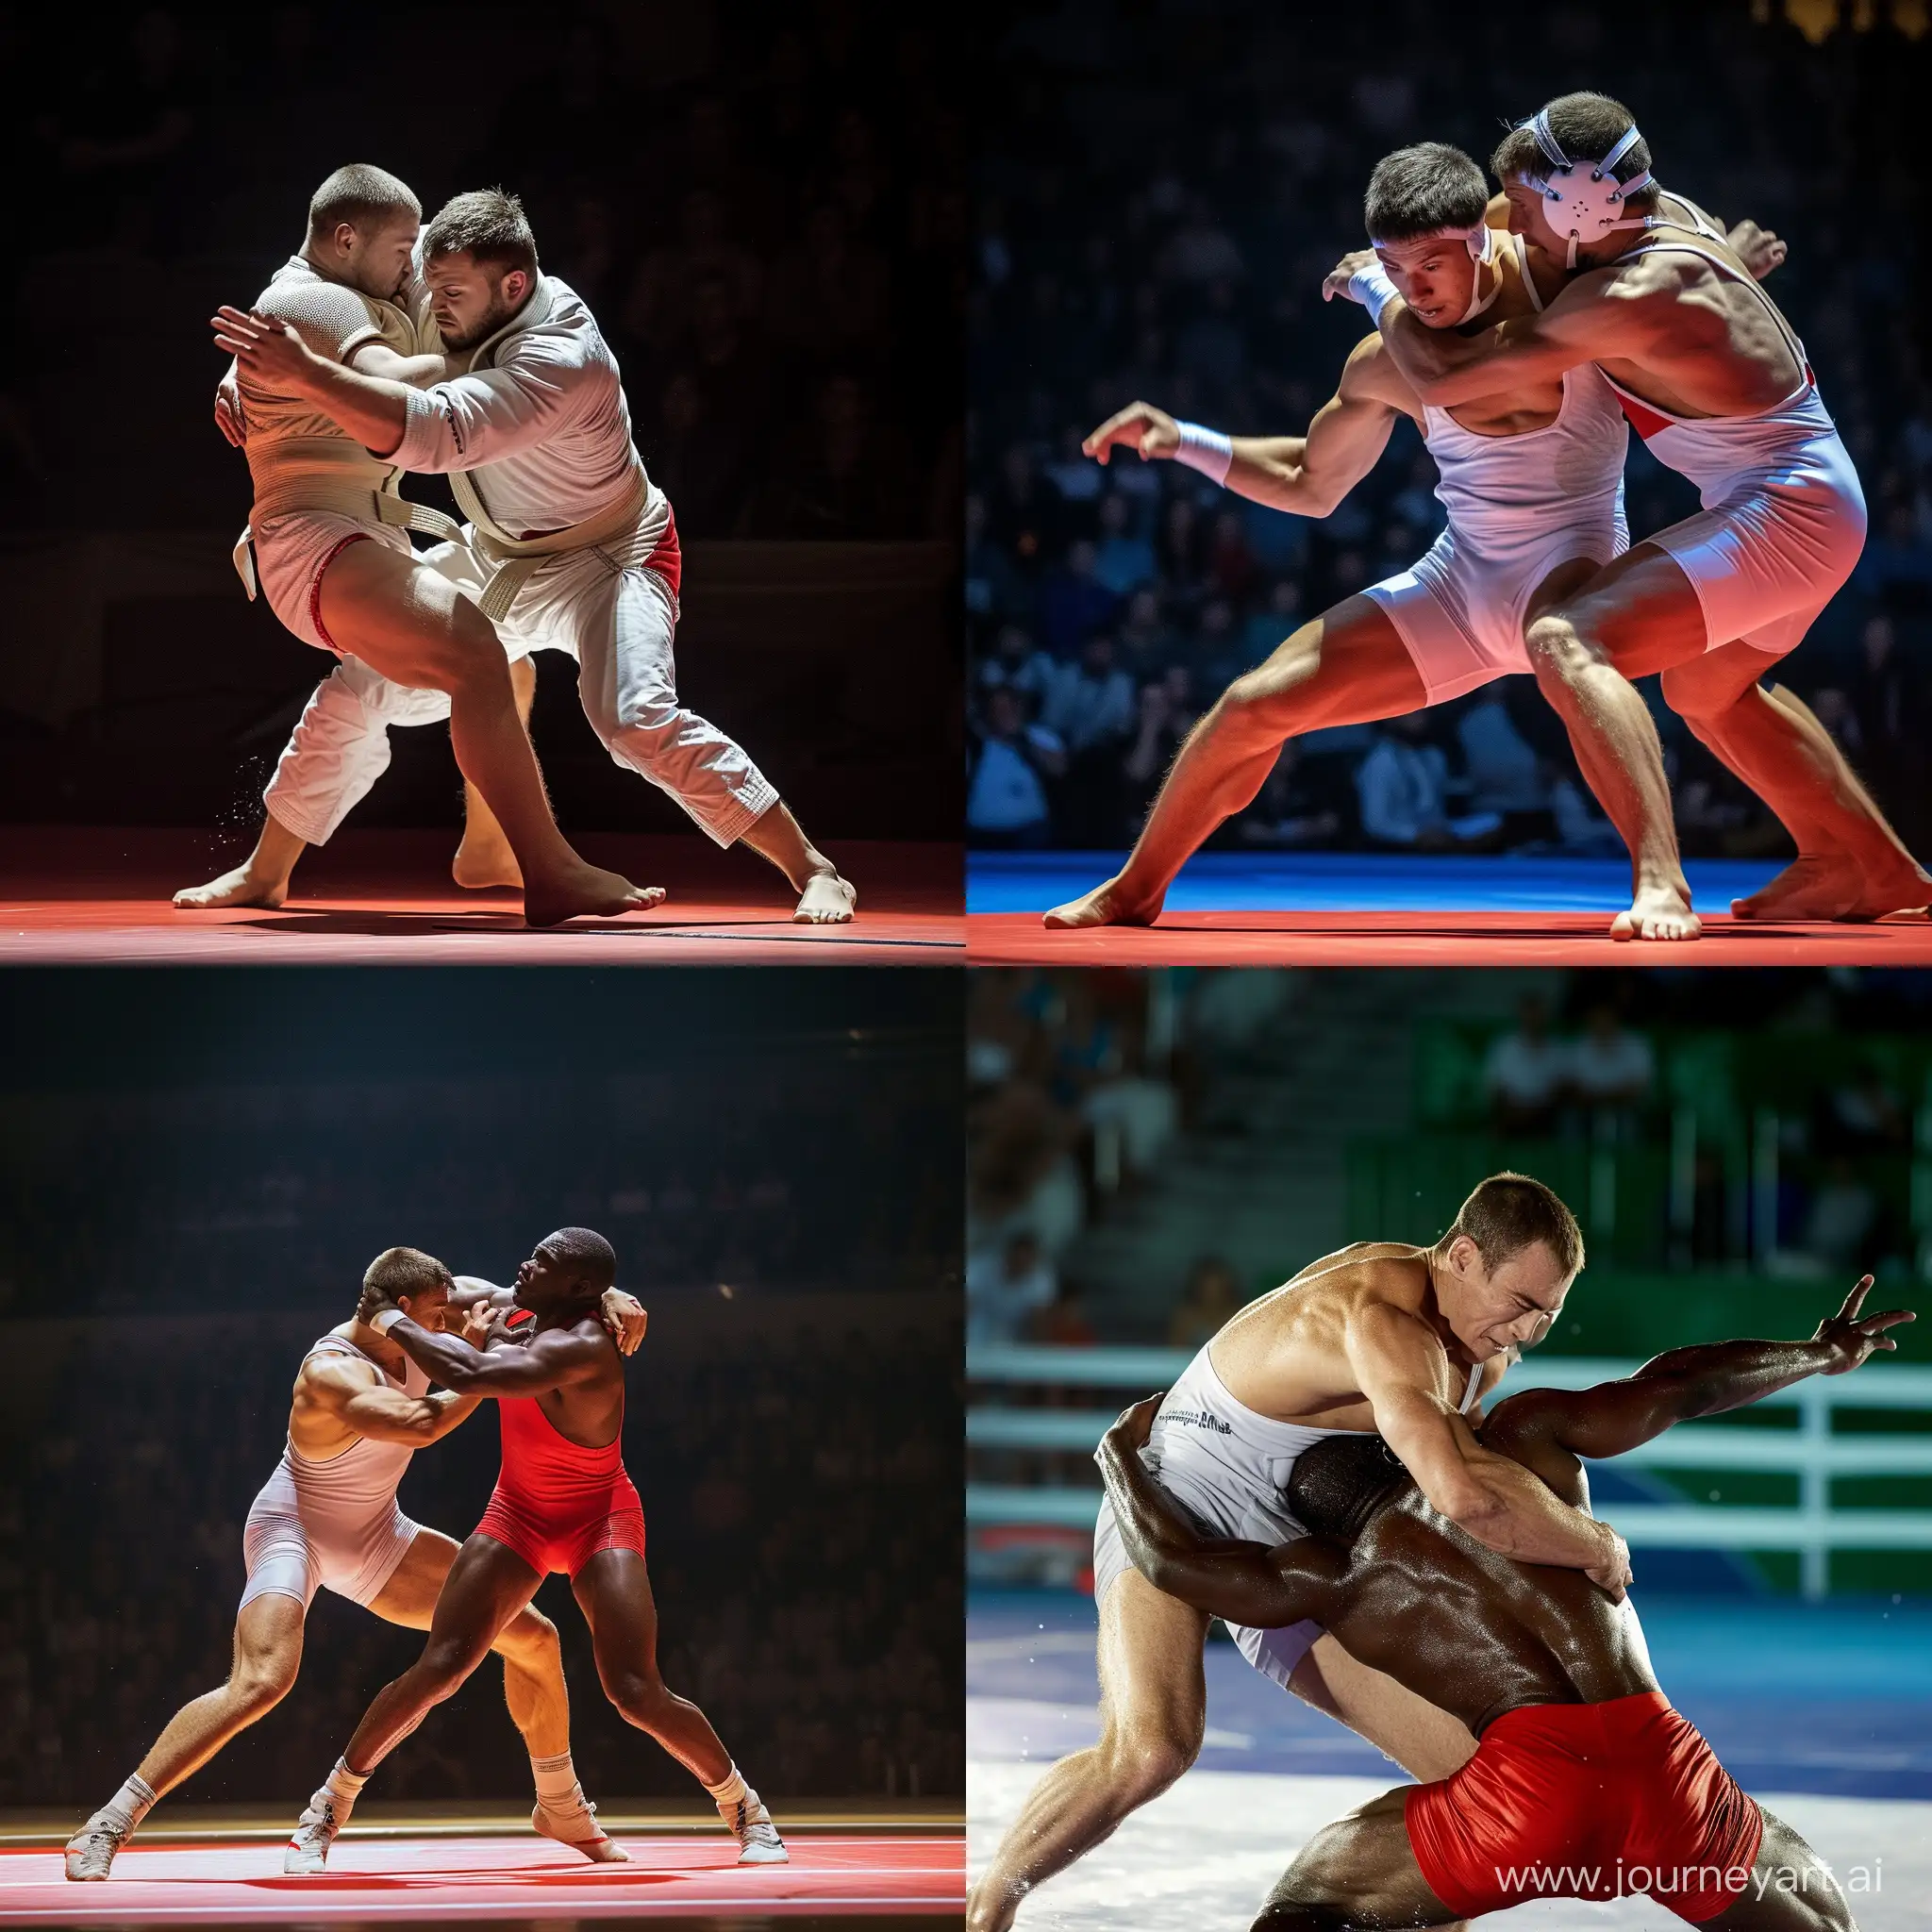 Two-Sambo-Wrestlers-Throwing-Each-Other-in-Intense-Match